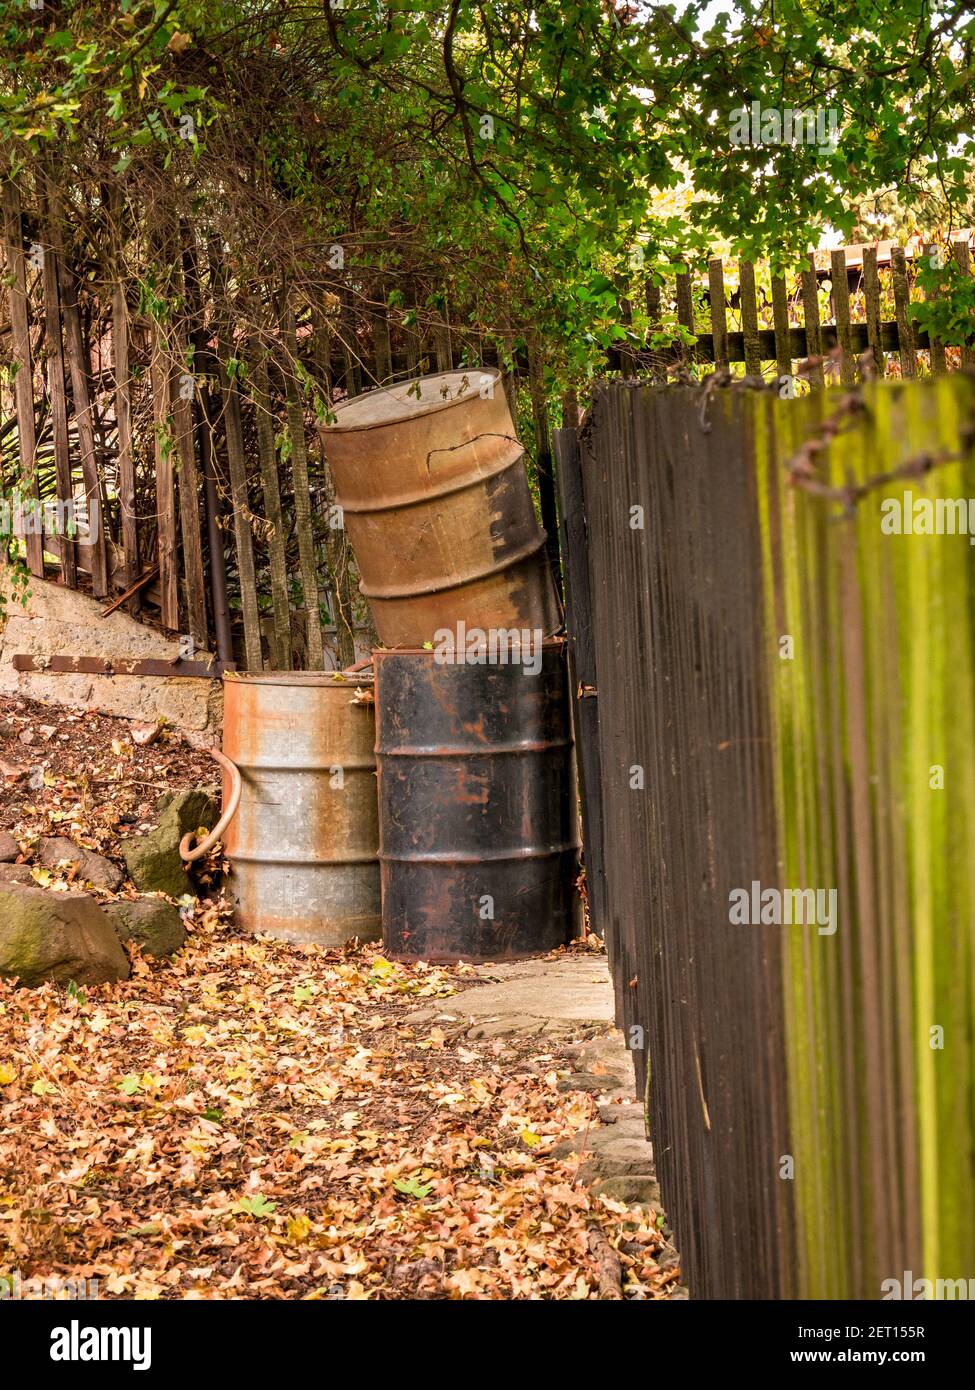 Old metal rusty barrels in the corner of a garden at a wooden fence Stock Photo